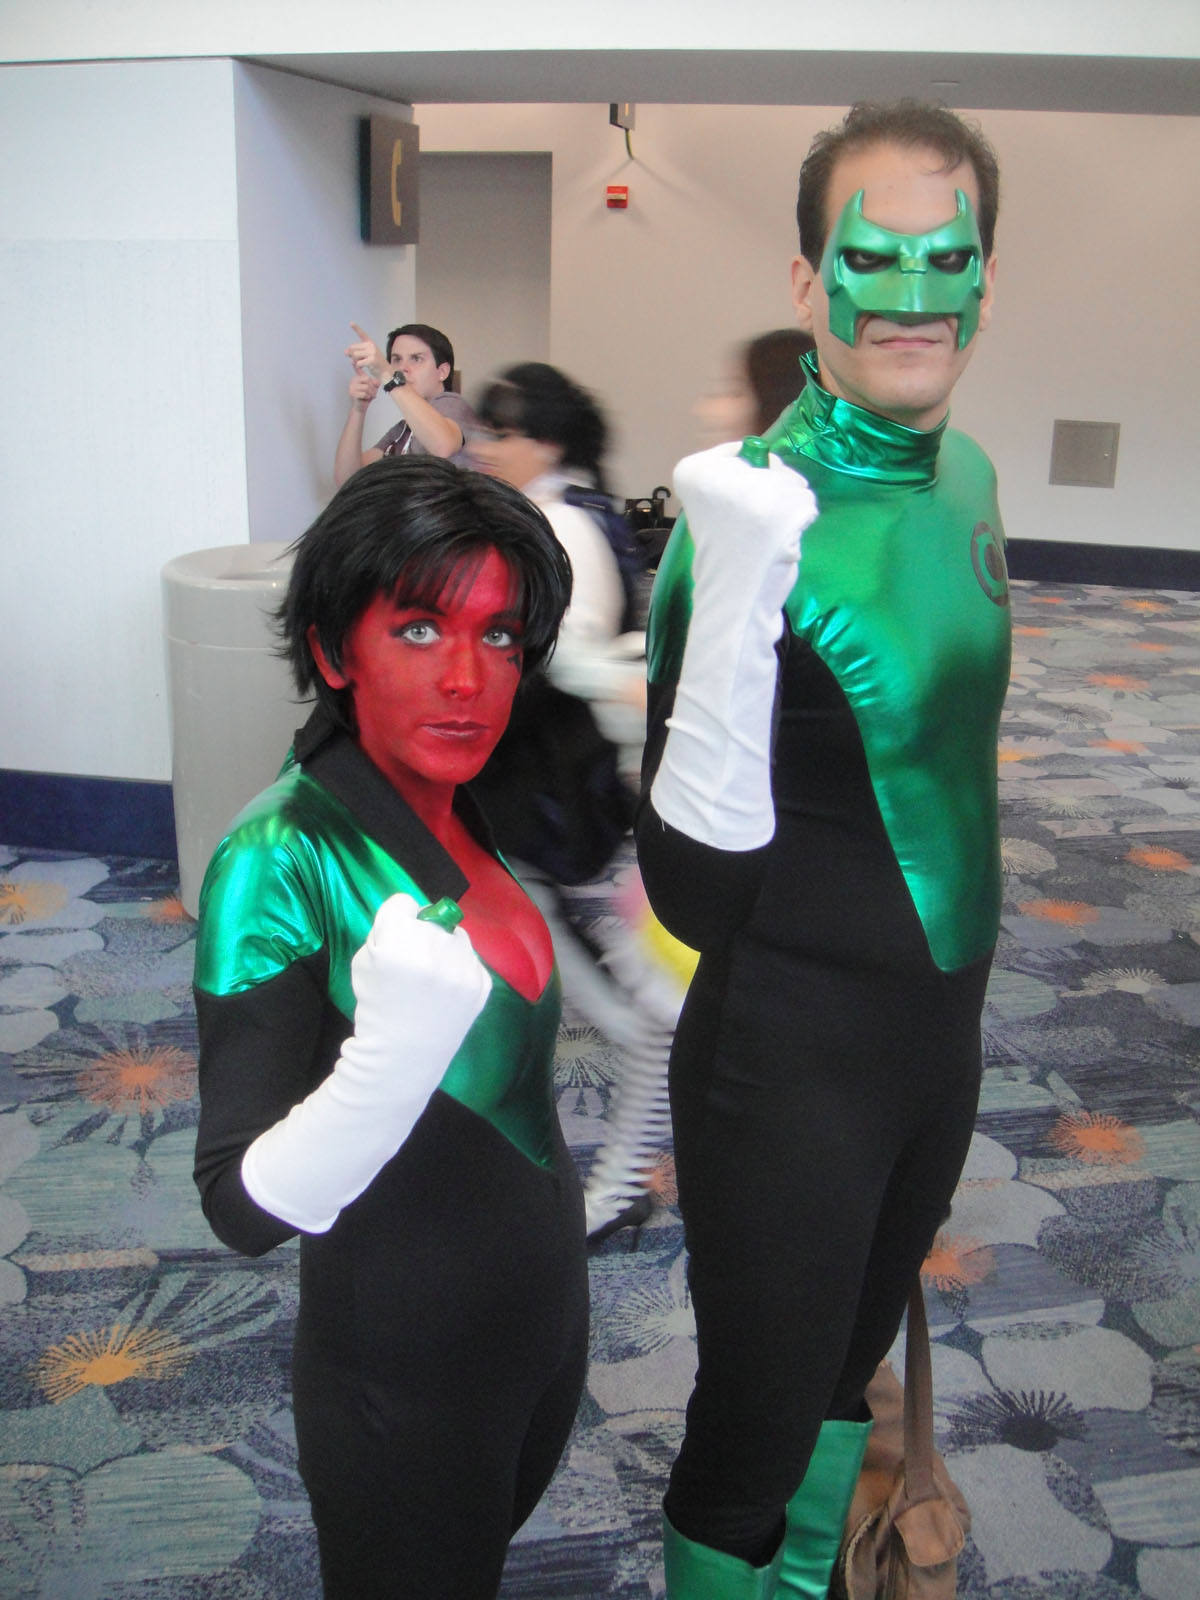 two people dressed as characters posing for a po